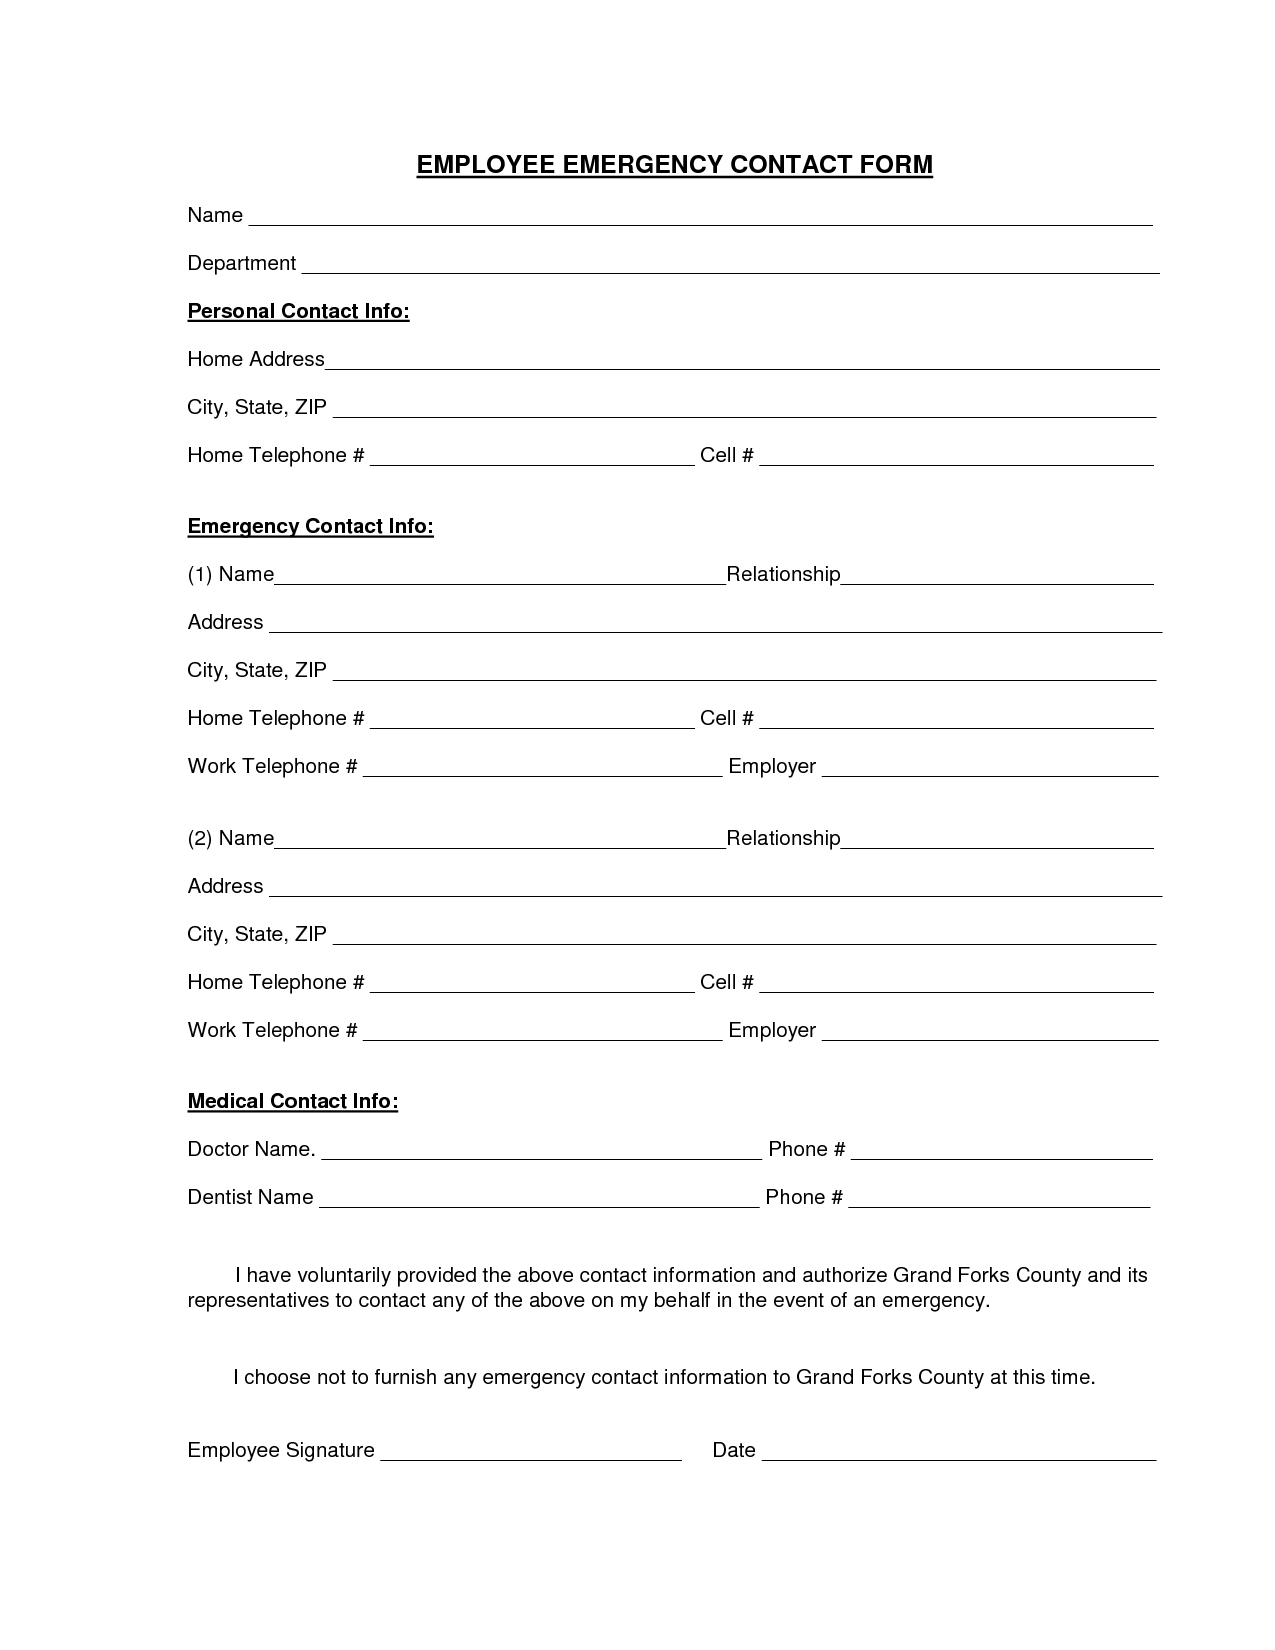 5-best-images-of-printable-emergency-contact-form-template-emergency